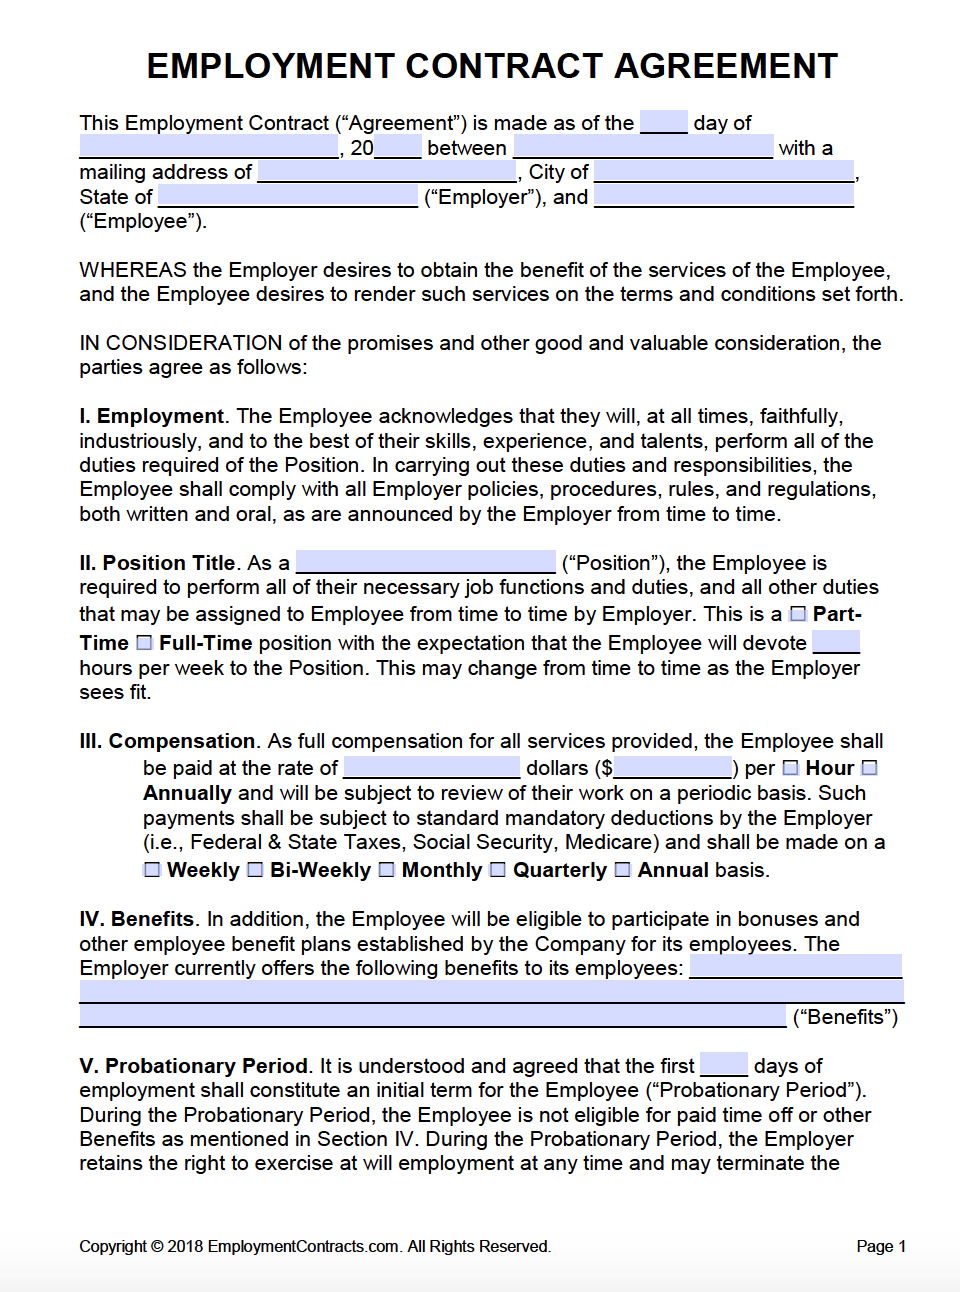 Employee Termination Agreement Sample Employment Agreement Contracts Pdf Word